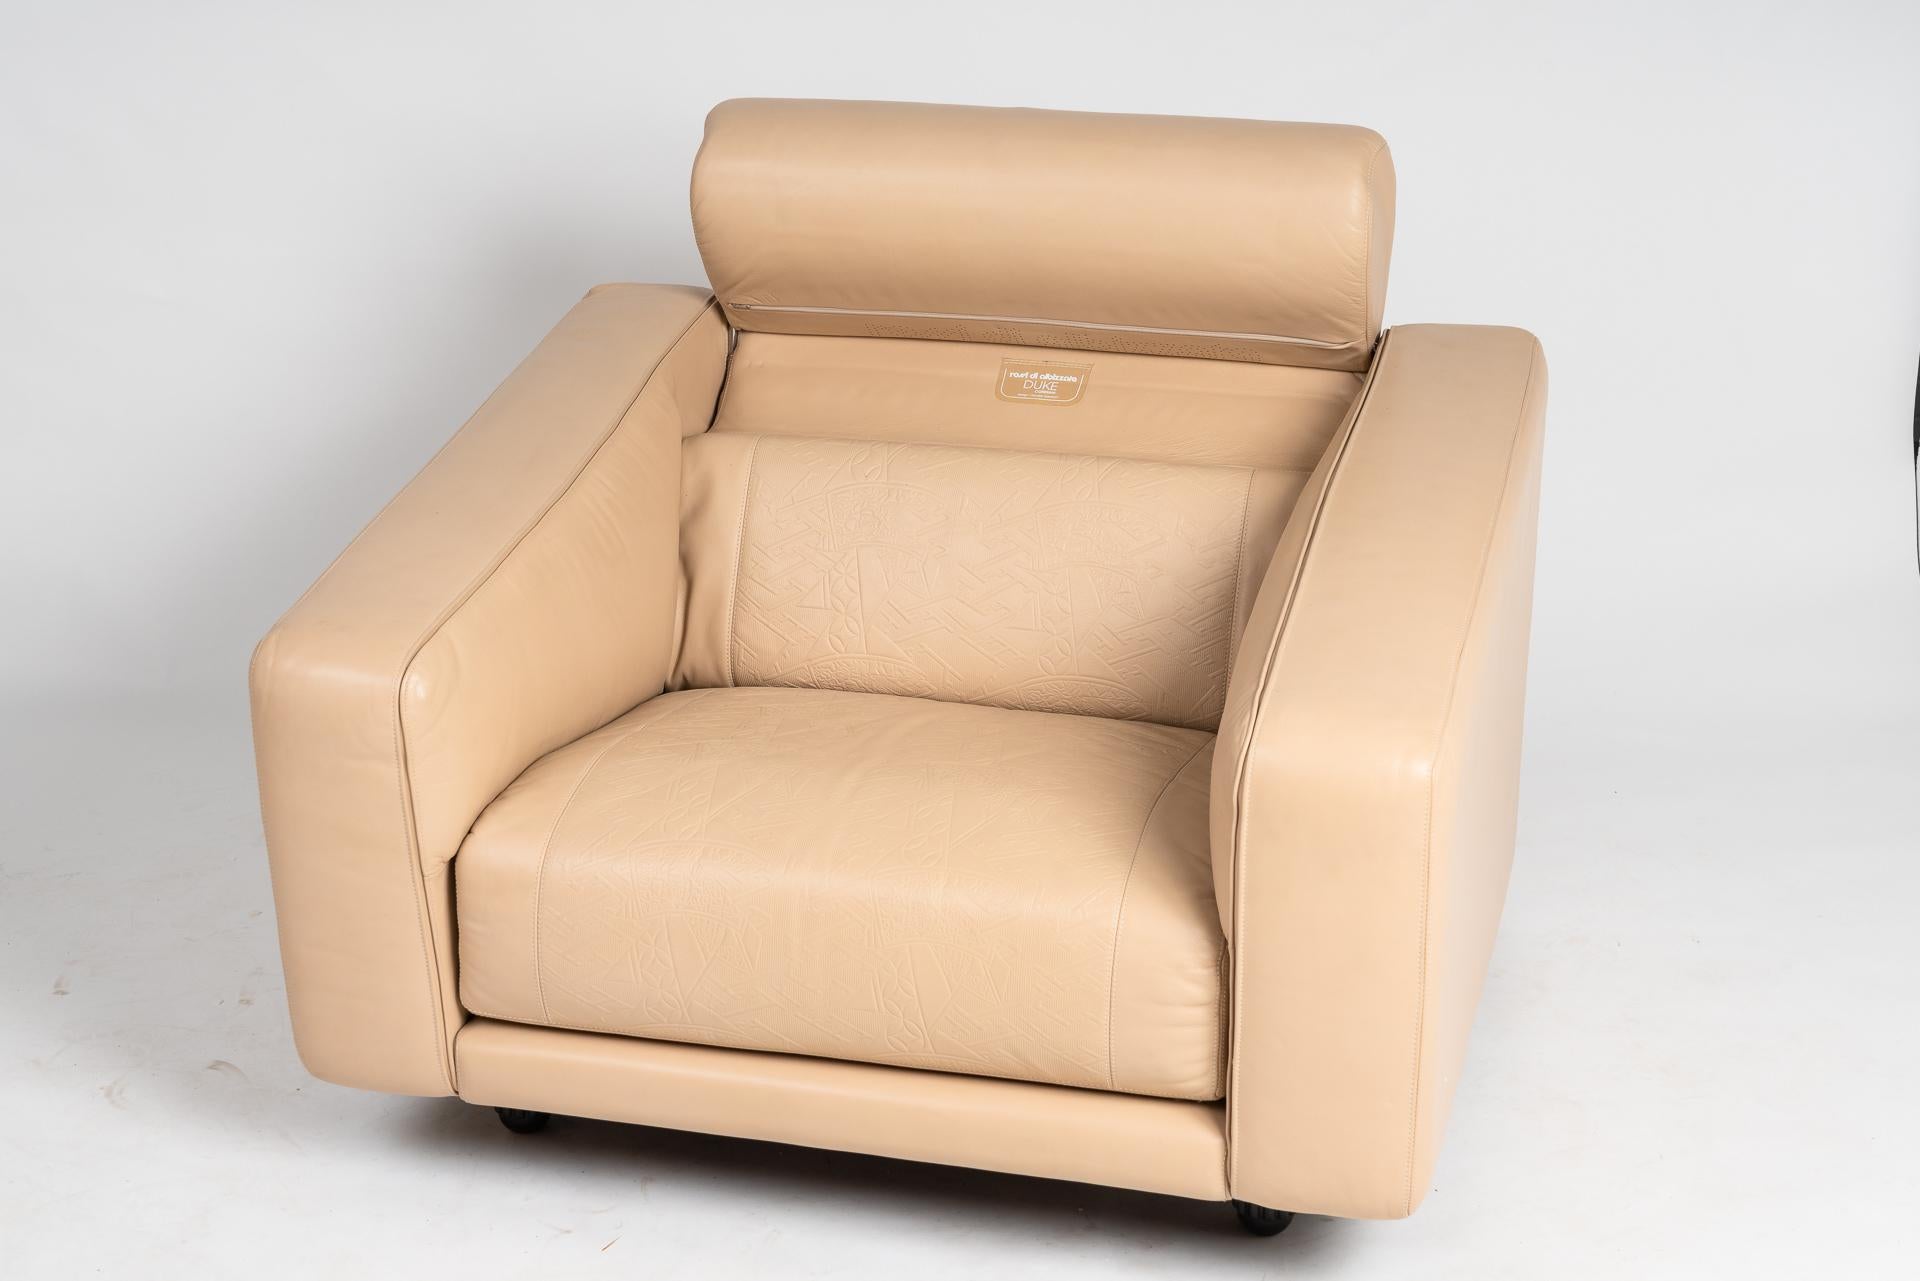 This unique armchair with its 1970s design by Claudio Salocchi is characterized by the rotating headrest and adjustable supports.
Very unusual is also the abstract leather embossing in this beautiful beige soft leathering.

The armchair was